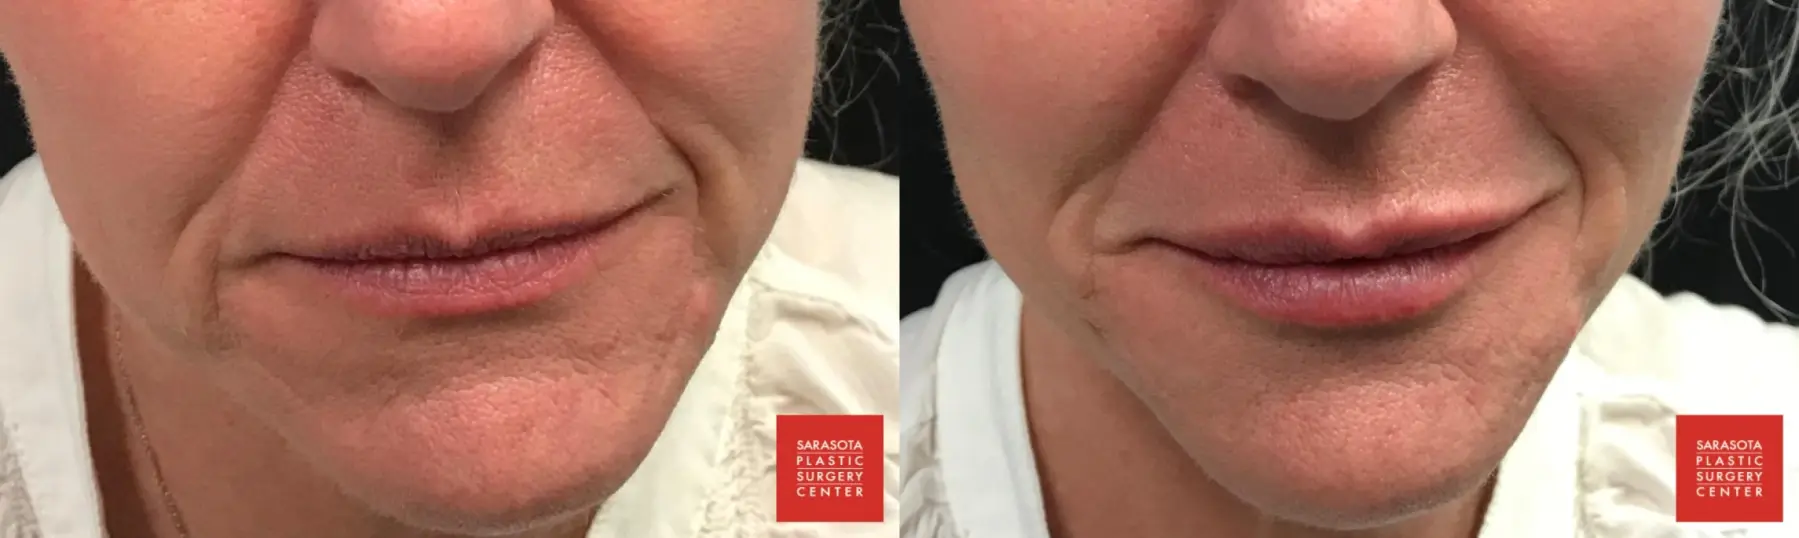 Injectables - Face: Patient 4 - Before and After  